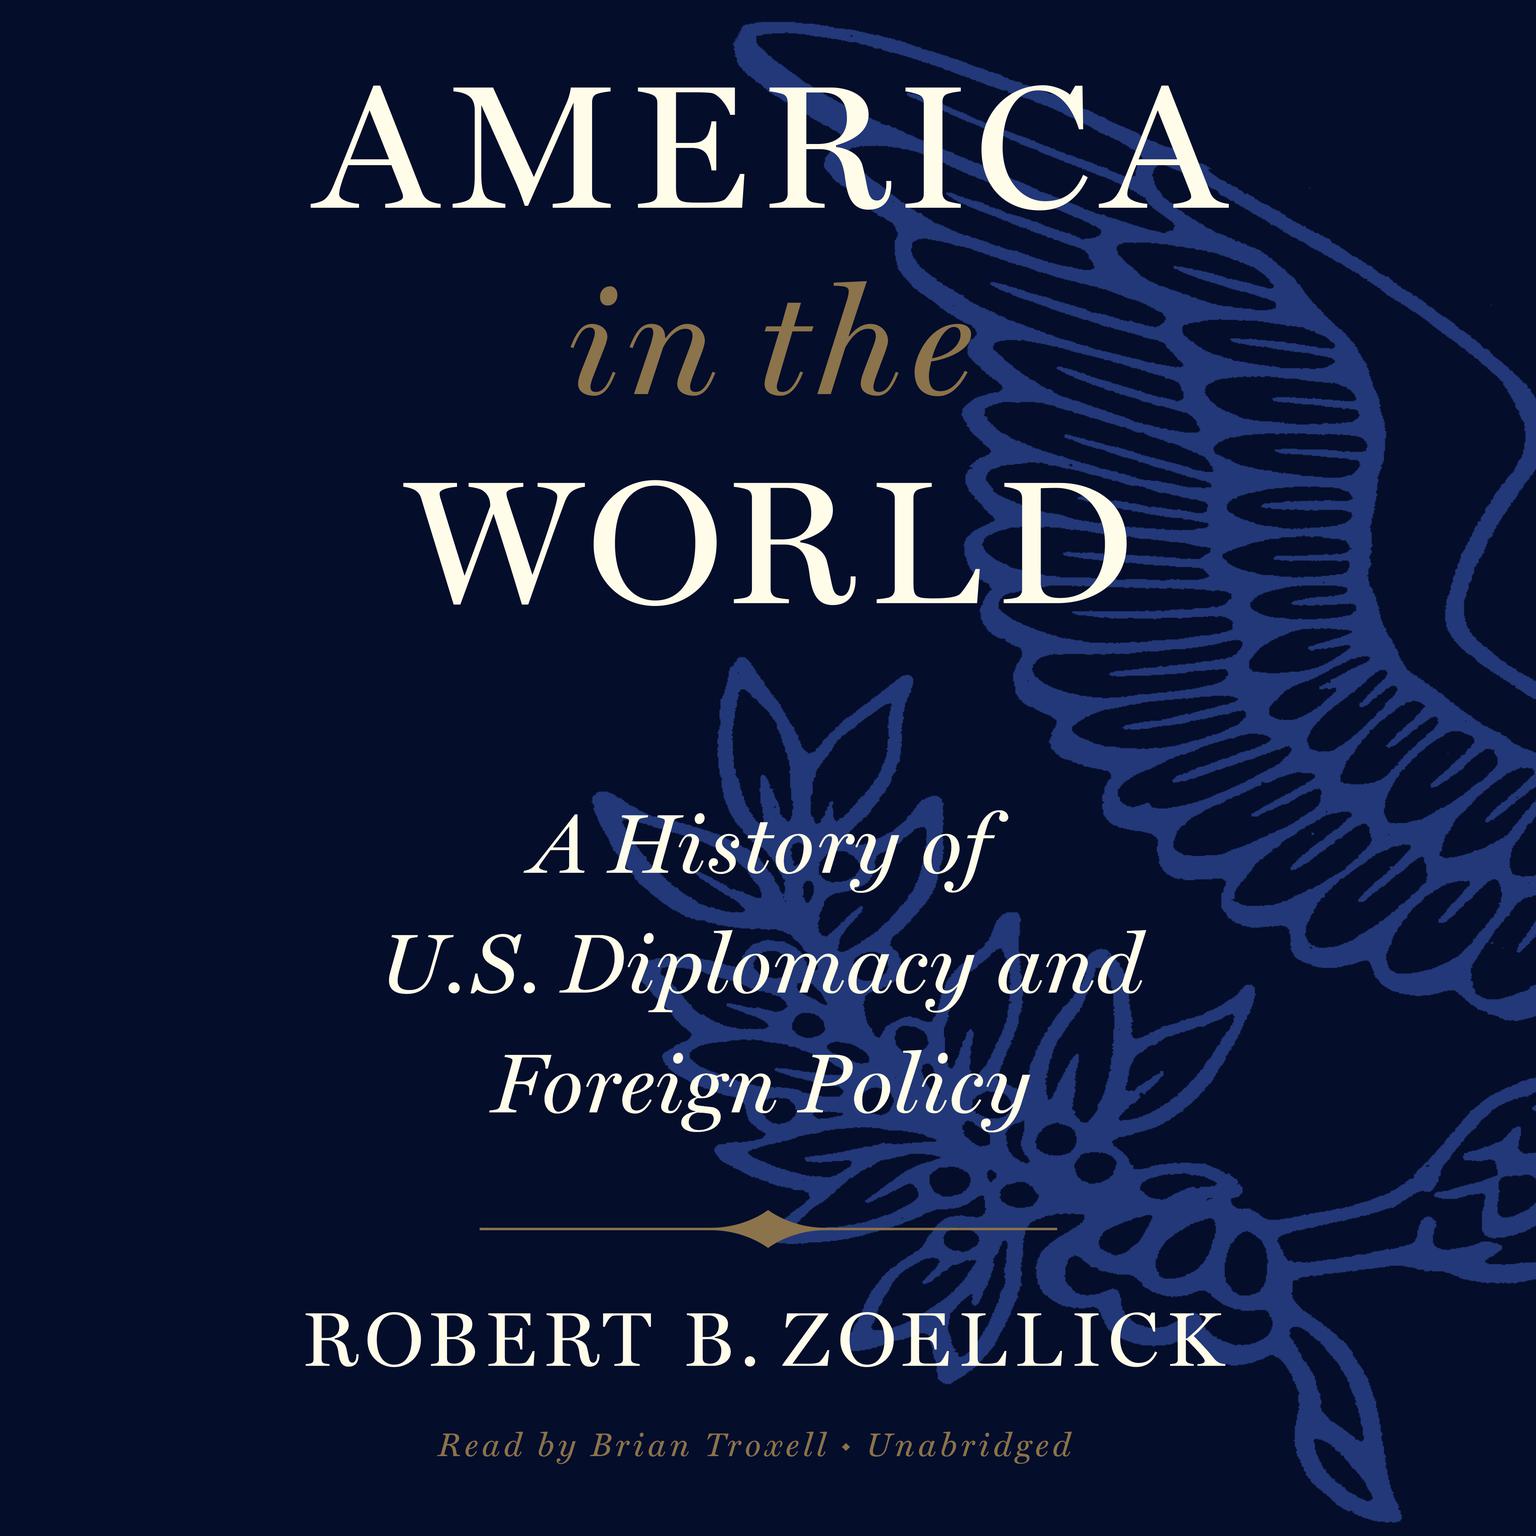 America in the World: A History of U.S. Diplomacy and Foreign Policy Audiobook, by Robert B. Zoellick